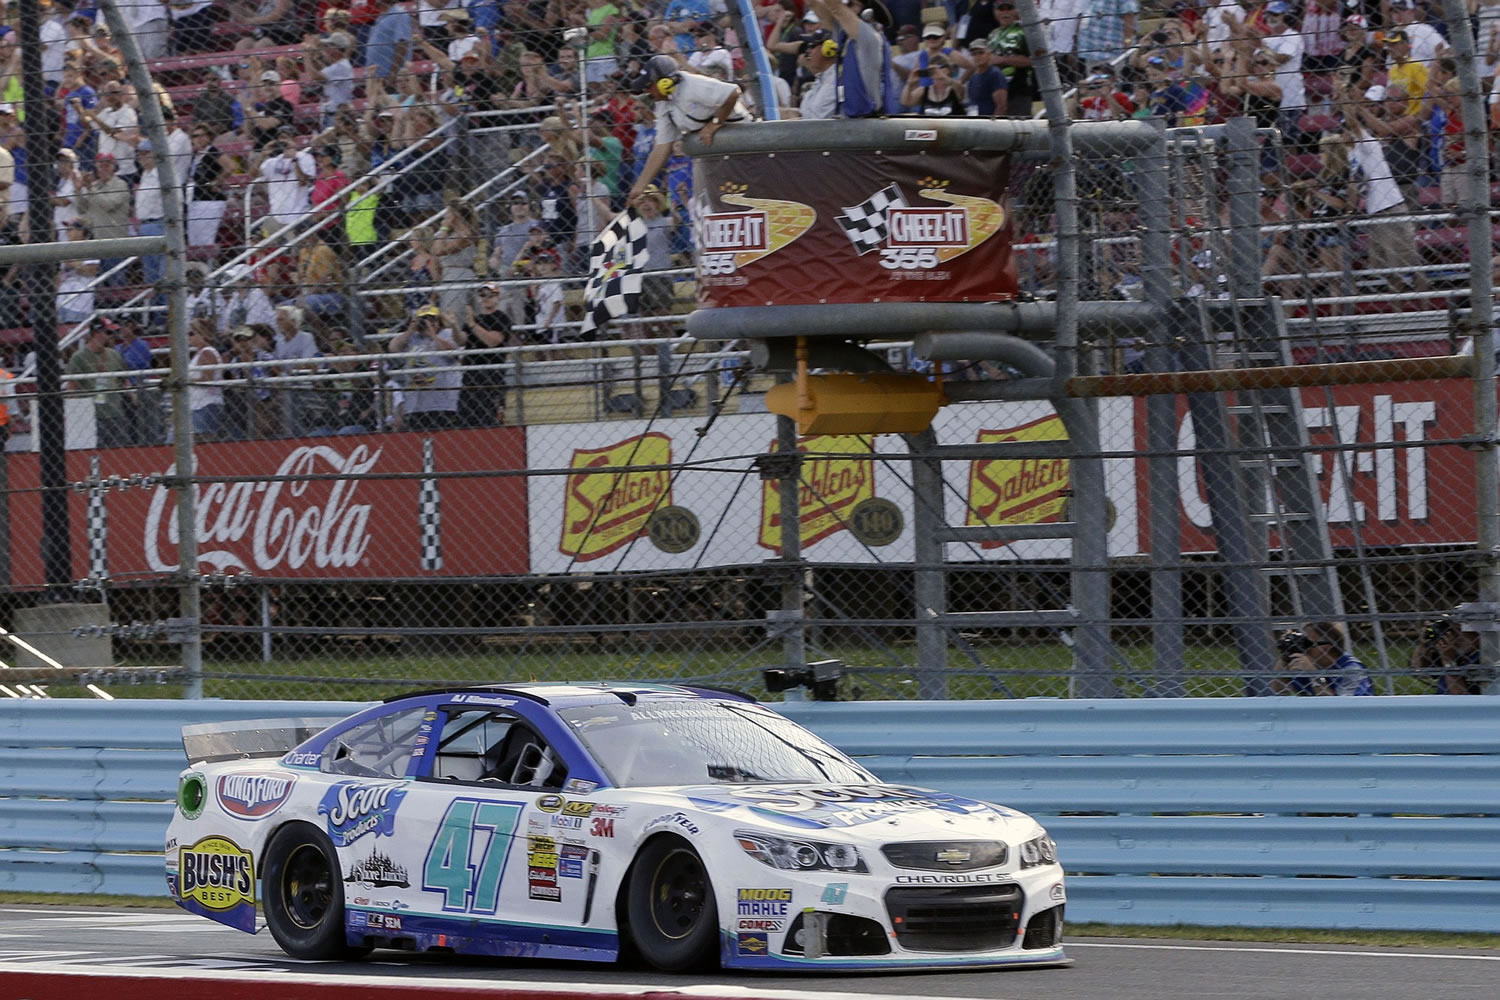 AJ Allmendinger (47) takes the checkered flag to win a NASCAR Sprint Cup Series auto race at Watkins Glen International, Sunday, Aug. 10, 2014, in Watkins Glen N.Y.